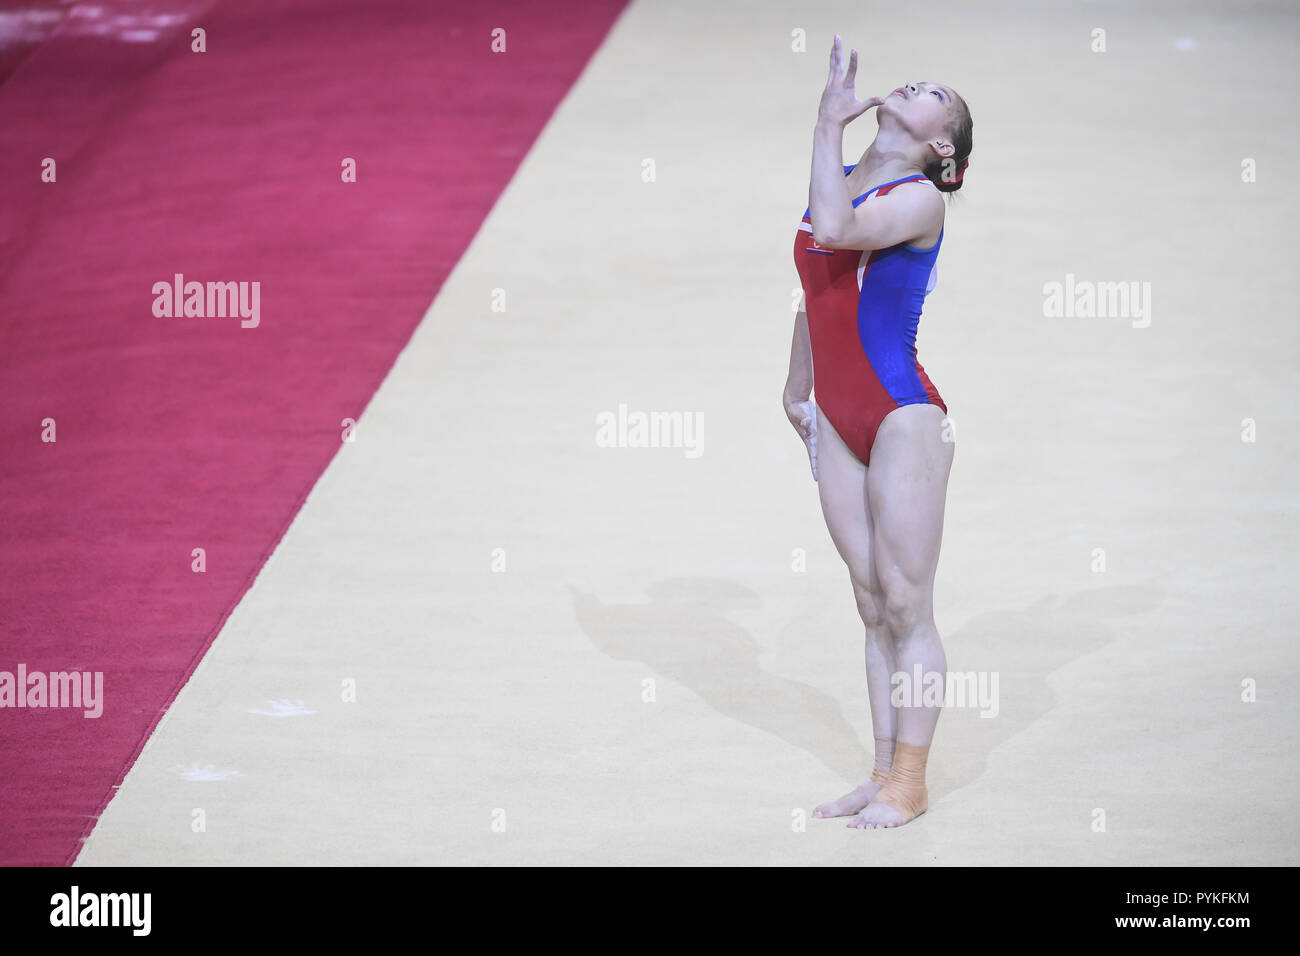 Doha, Qatar. 27th Oct, 2018. SU JONG KIM from North Korea competes on the floor exercise during the second day of preliminary competition held at the Aspire Dome in Doha, Qatar. Credit: Amy Sanderson/ZUMA Wire/Alamy Live News Stock Photo